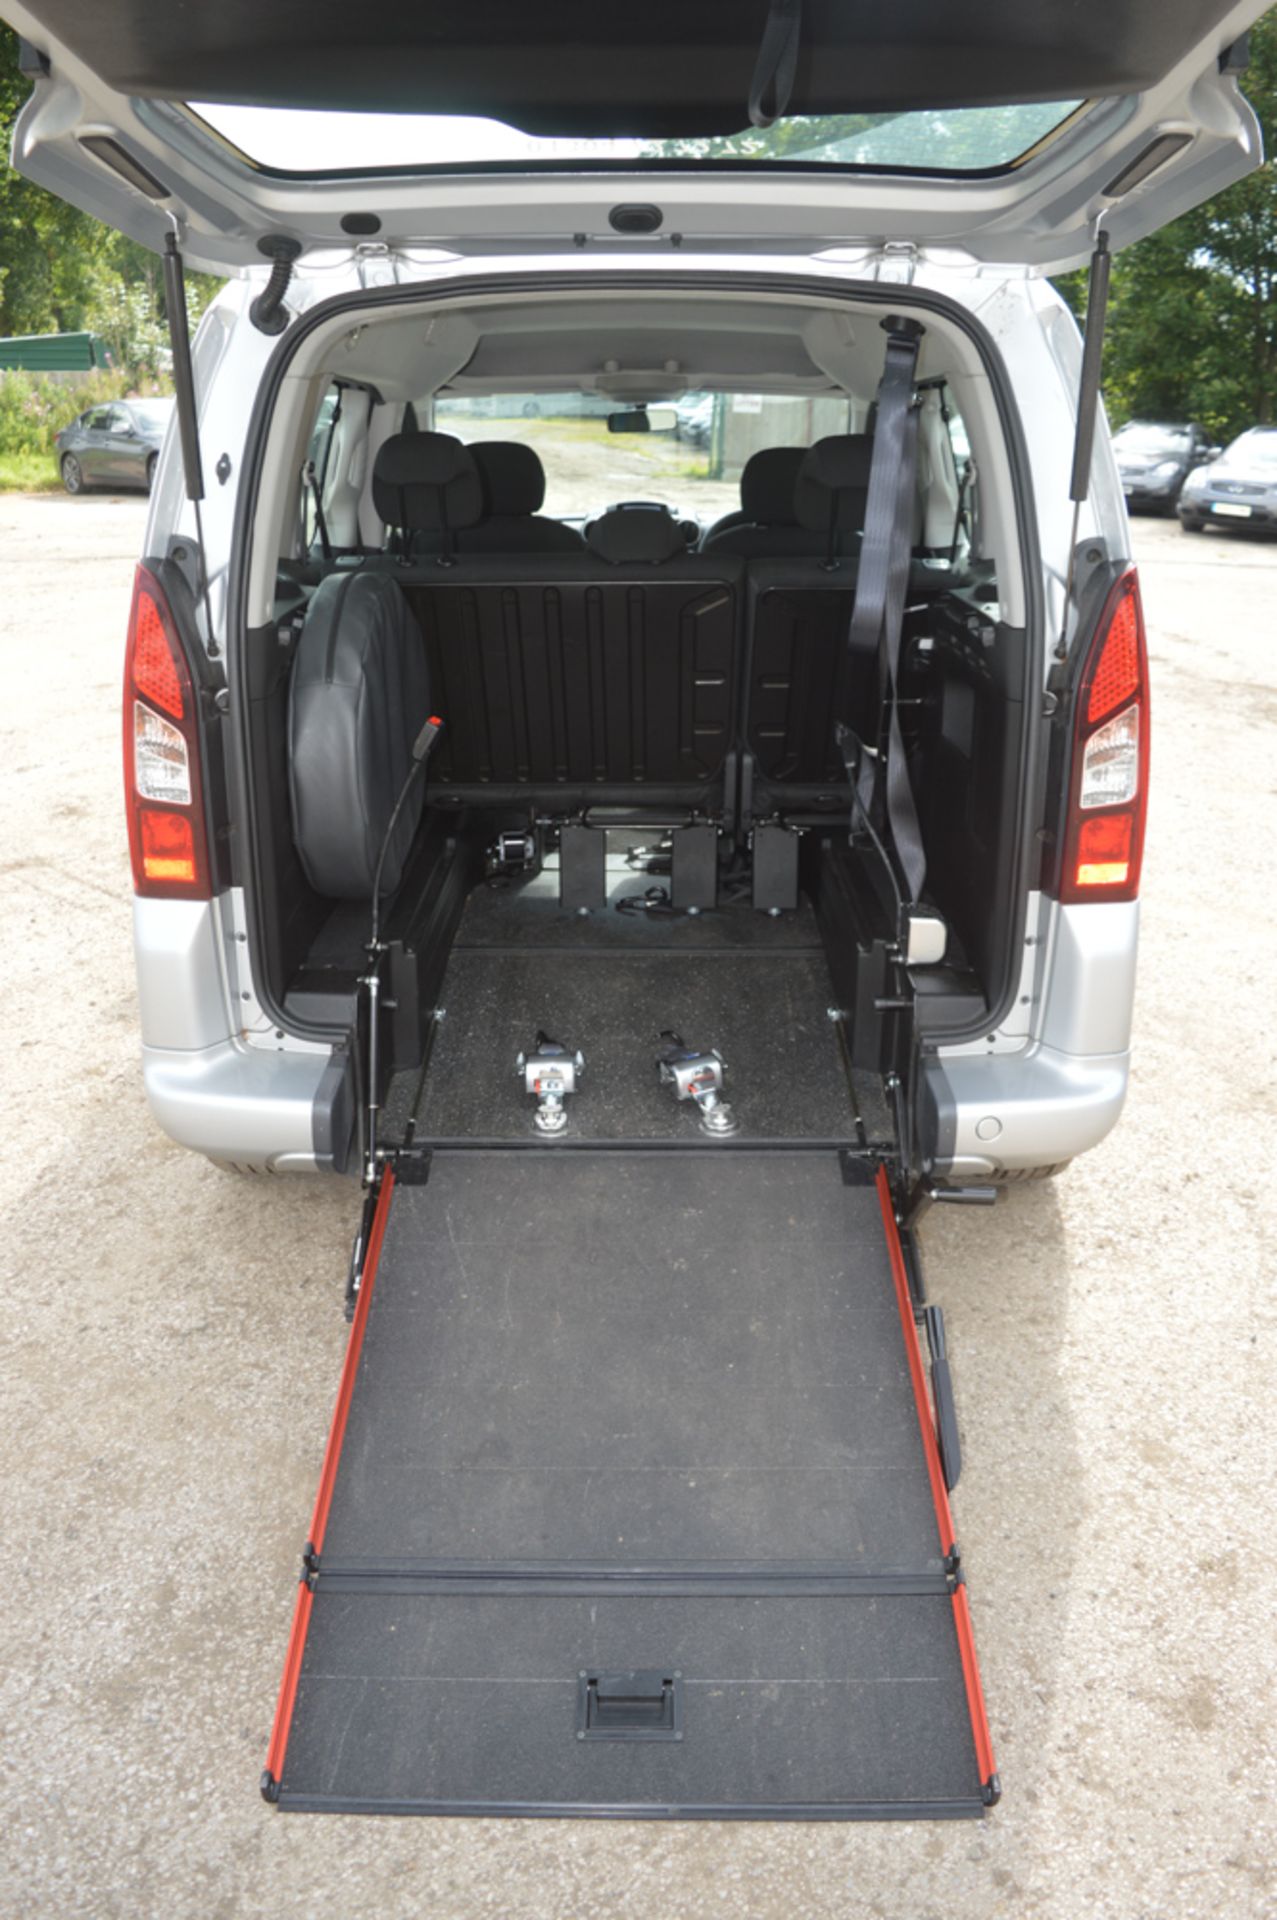 Peugeot Premier RS Blue HDI S/S 5 seat wheelchair access MPV Registration number: SF16 GFG Date of - Image 7 of 11